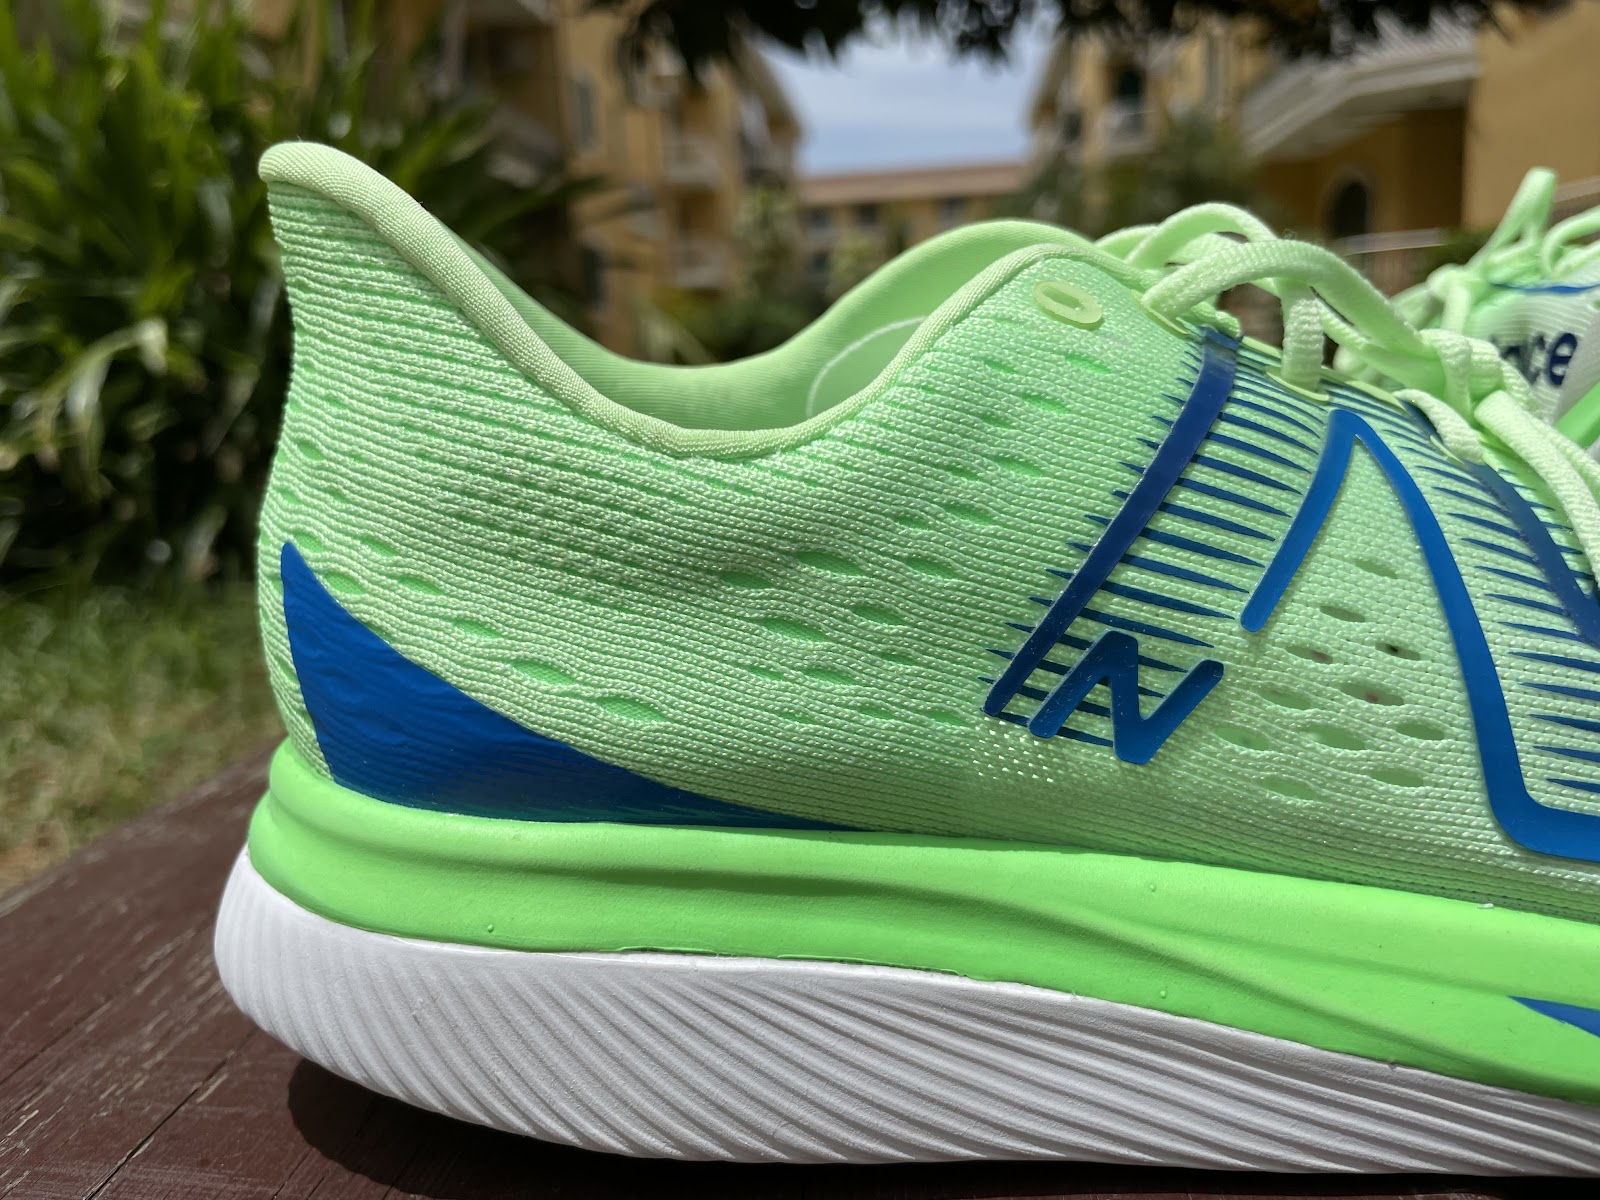 Road Trail Run: New Balance Fuel Cell Super Comp Pacer Multi Tester Review:  Carbon Powered Race Flat Vibes. 10 Comparisons